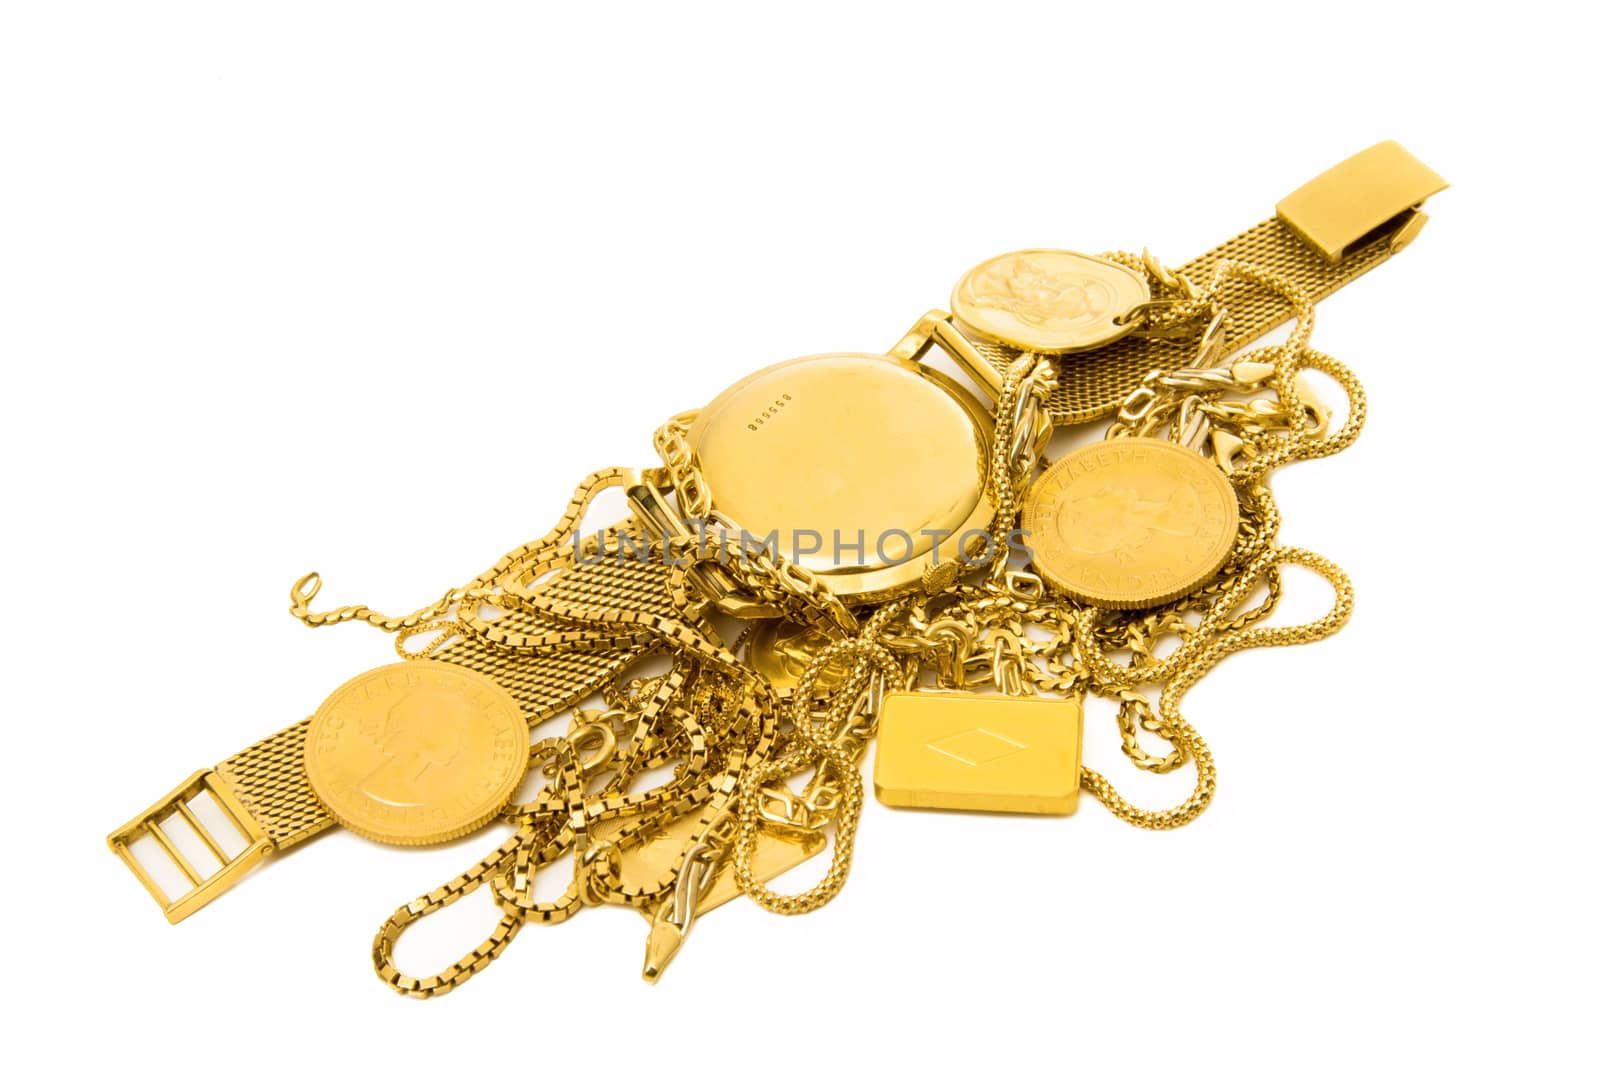 objects of gold on white background by photobeps